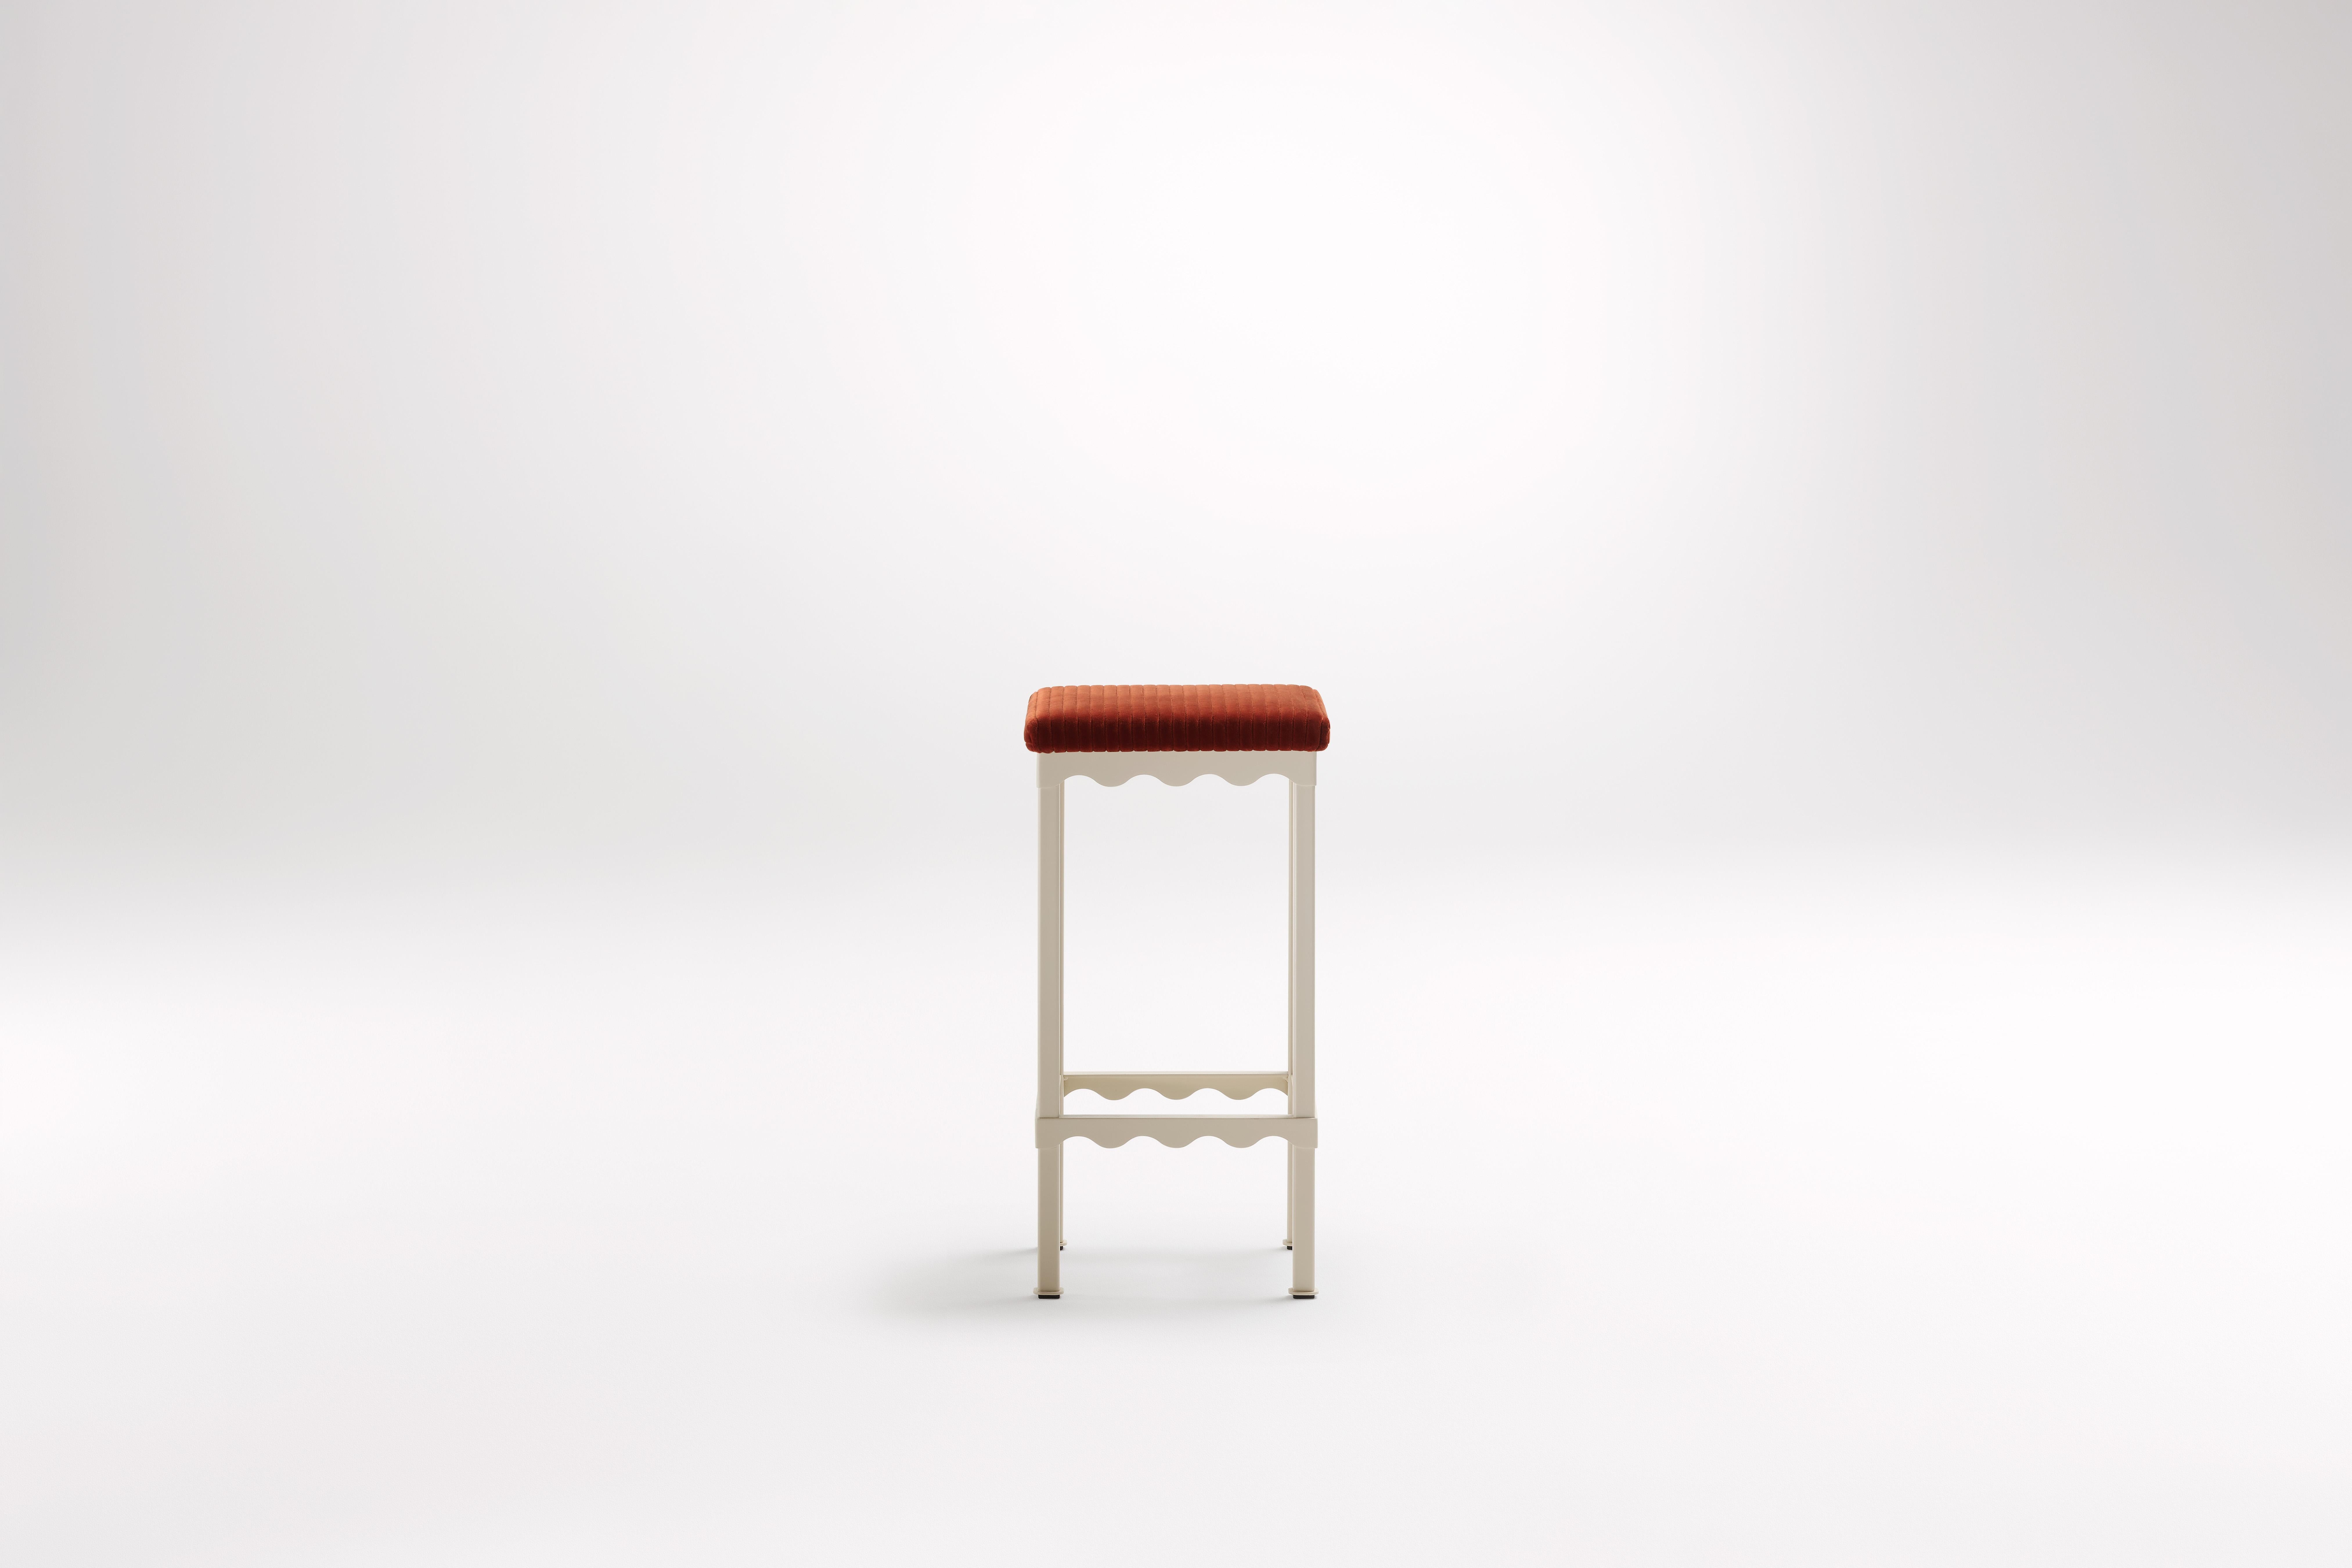 Sanguine Bellini High Stool by Coco Flip
Dimensions: D 34 x W 34 x H 65/75 cm
Materials: Timber / Stone tops, Powder-coated steel frame. 
Weight: 8kg
Frame Finishes: Textura Paperbark.

Coco Flip is a Melbourne based furniture and lighting design